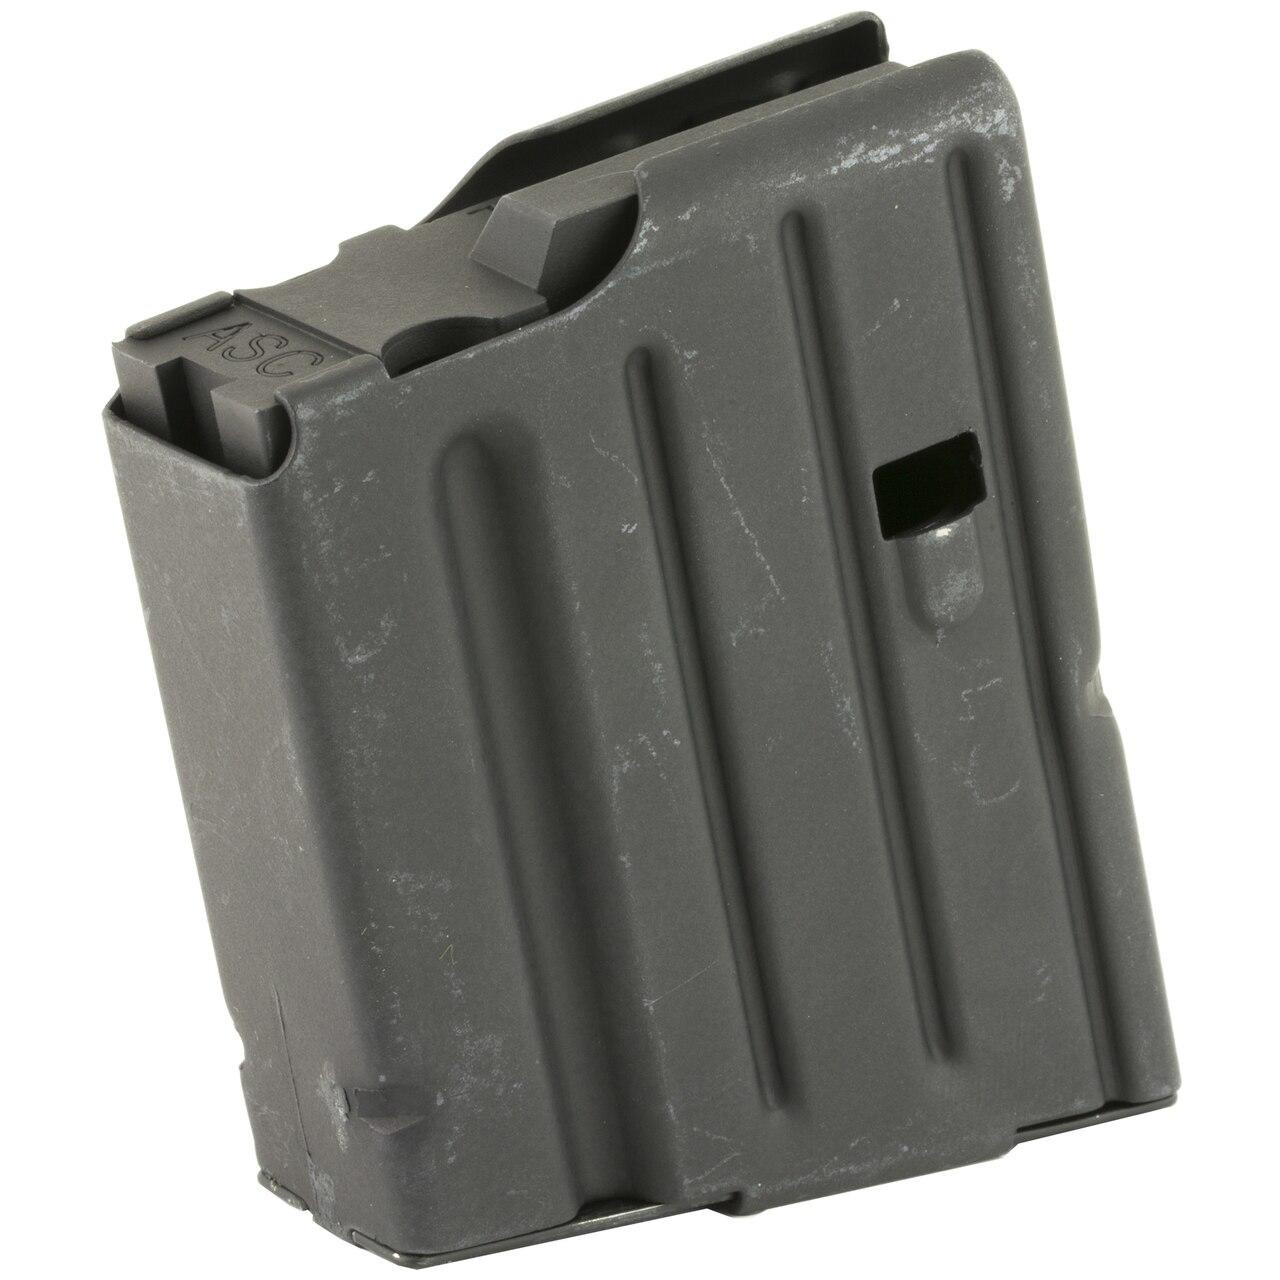 Smith and Wesson Mag Sandw Mandp10 308win 5rd Blk Alum 022188200676